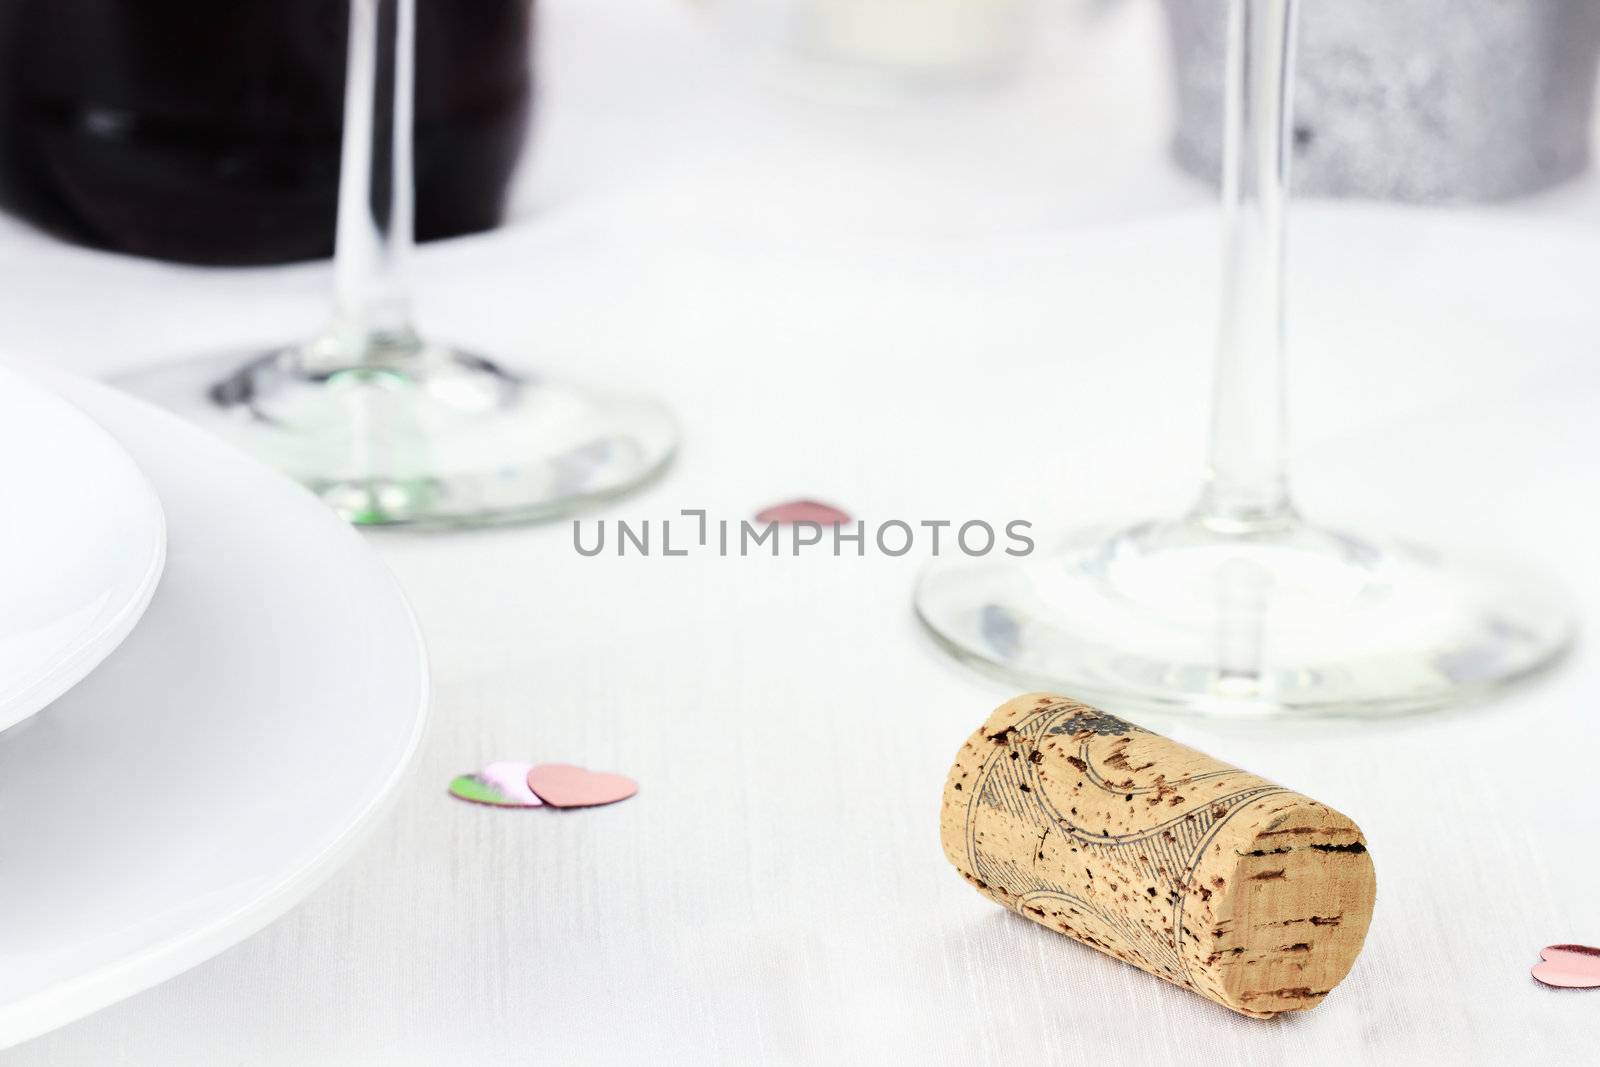 Wine cork near dinner plates and wine glasses. Shallow depth of field.